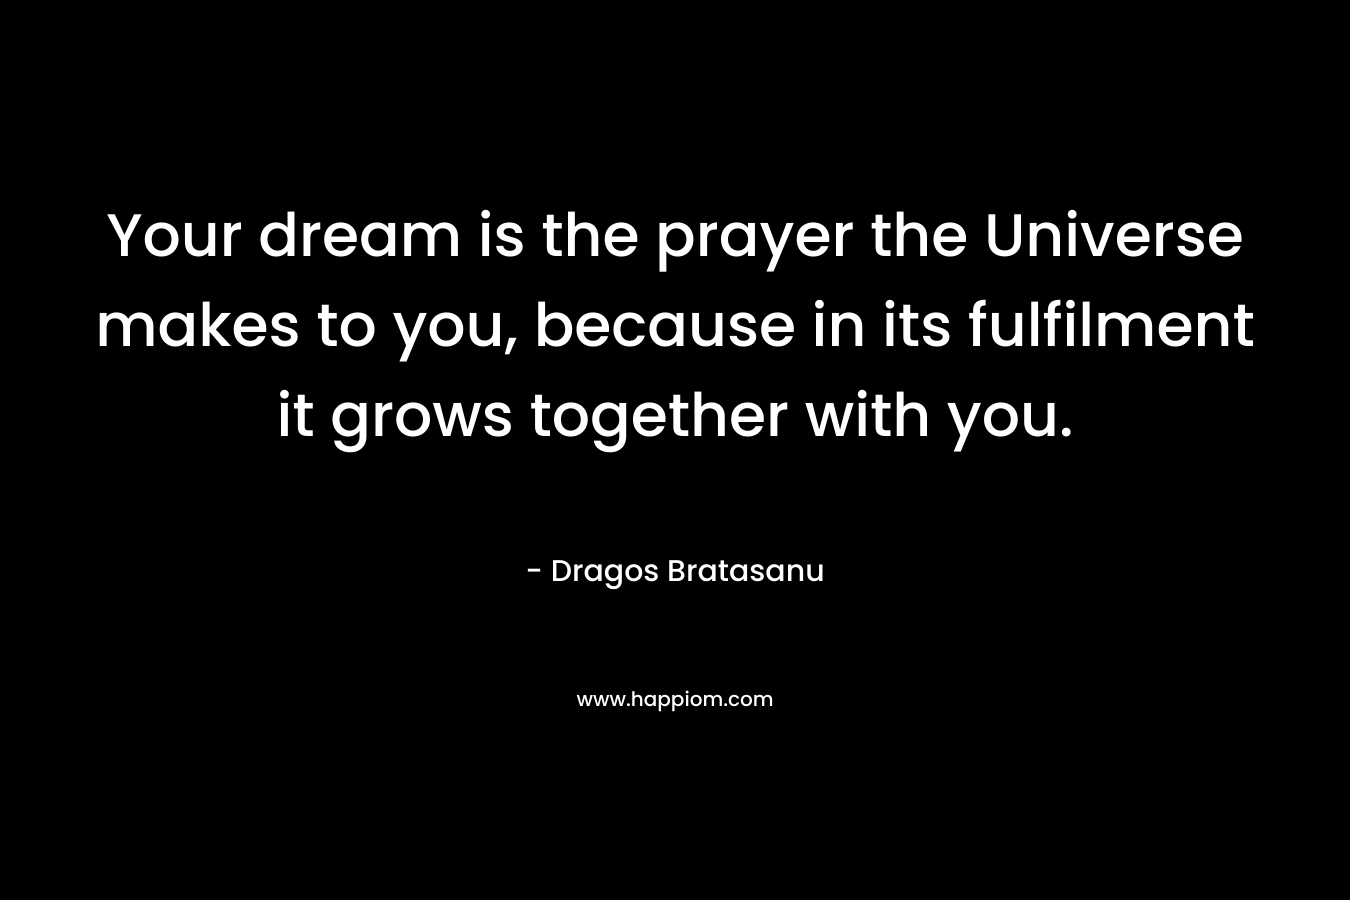 Your dream is the prayer the Universe makes to you, because in its fulfilment it grows together with you. – Dragos Bratasanu